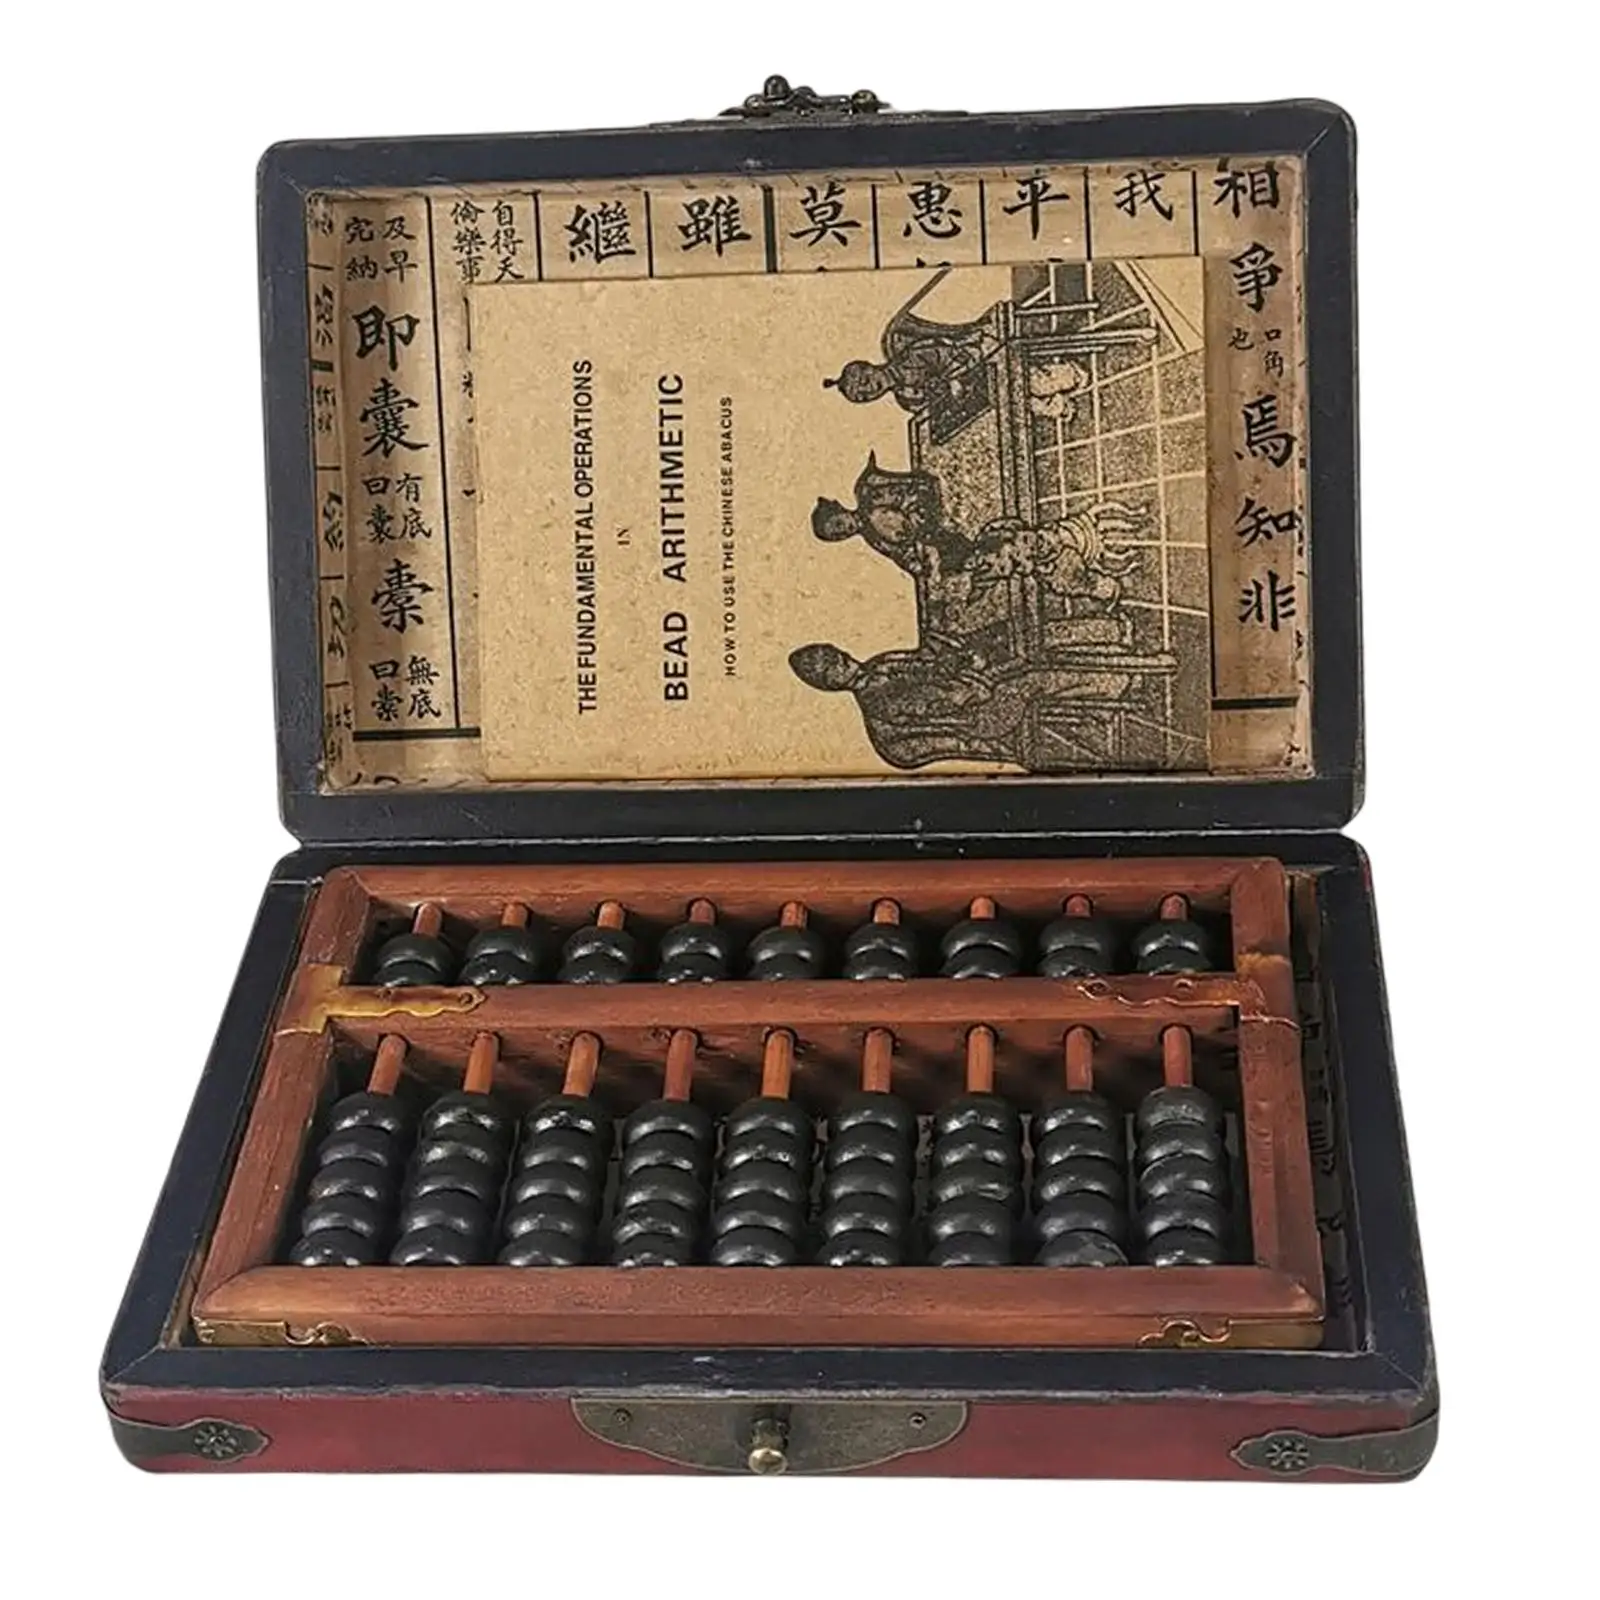 9 digits Rods Abacus with Box Learning Aids Chinese Wooden Bead Arithmetic Abacus for Kids